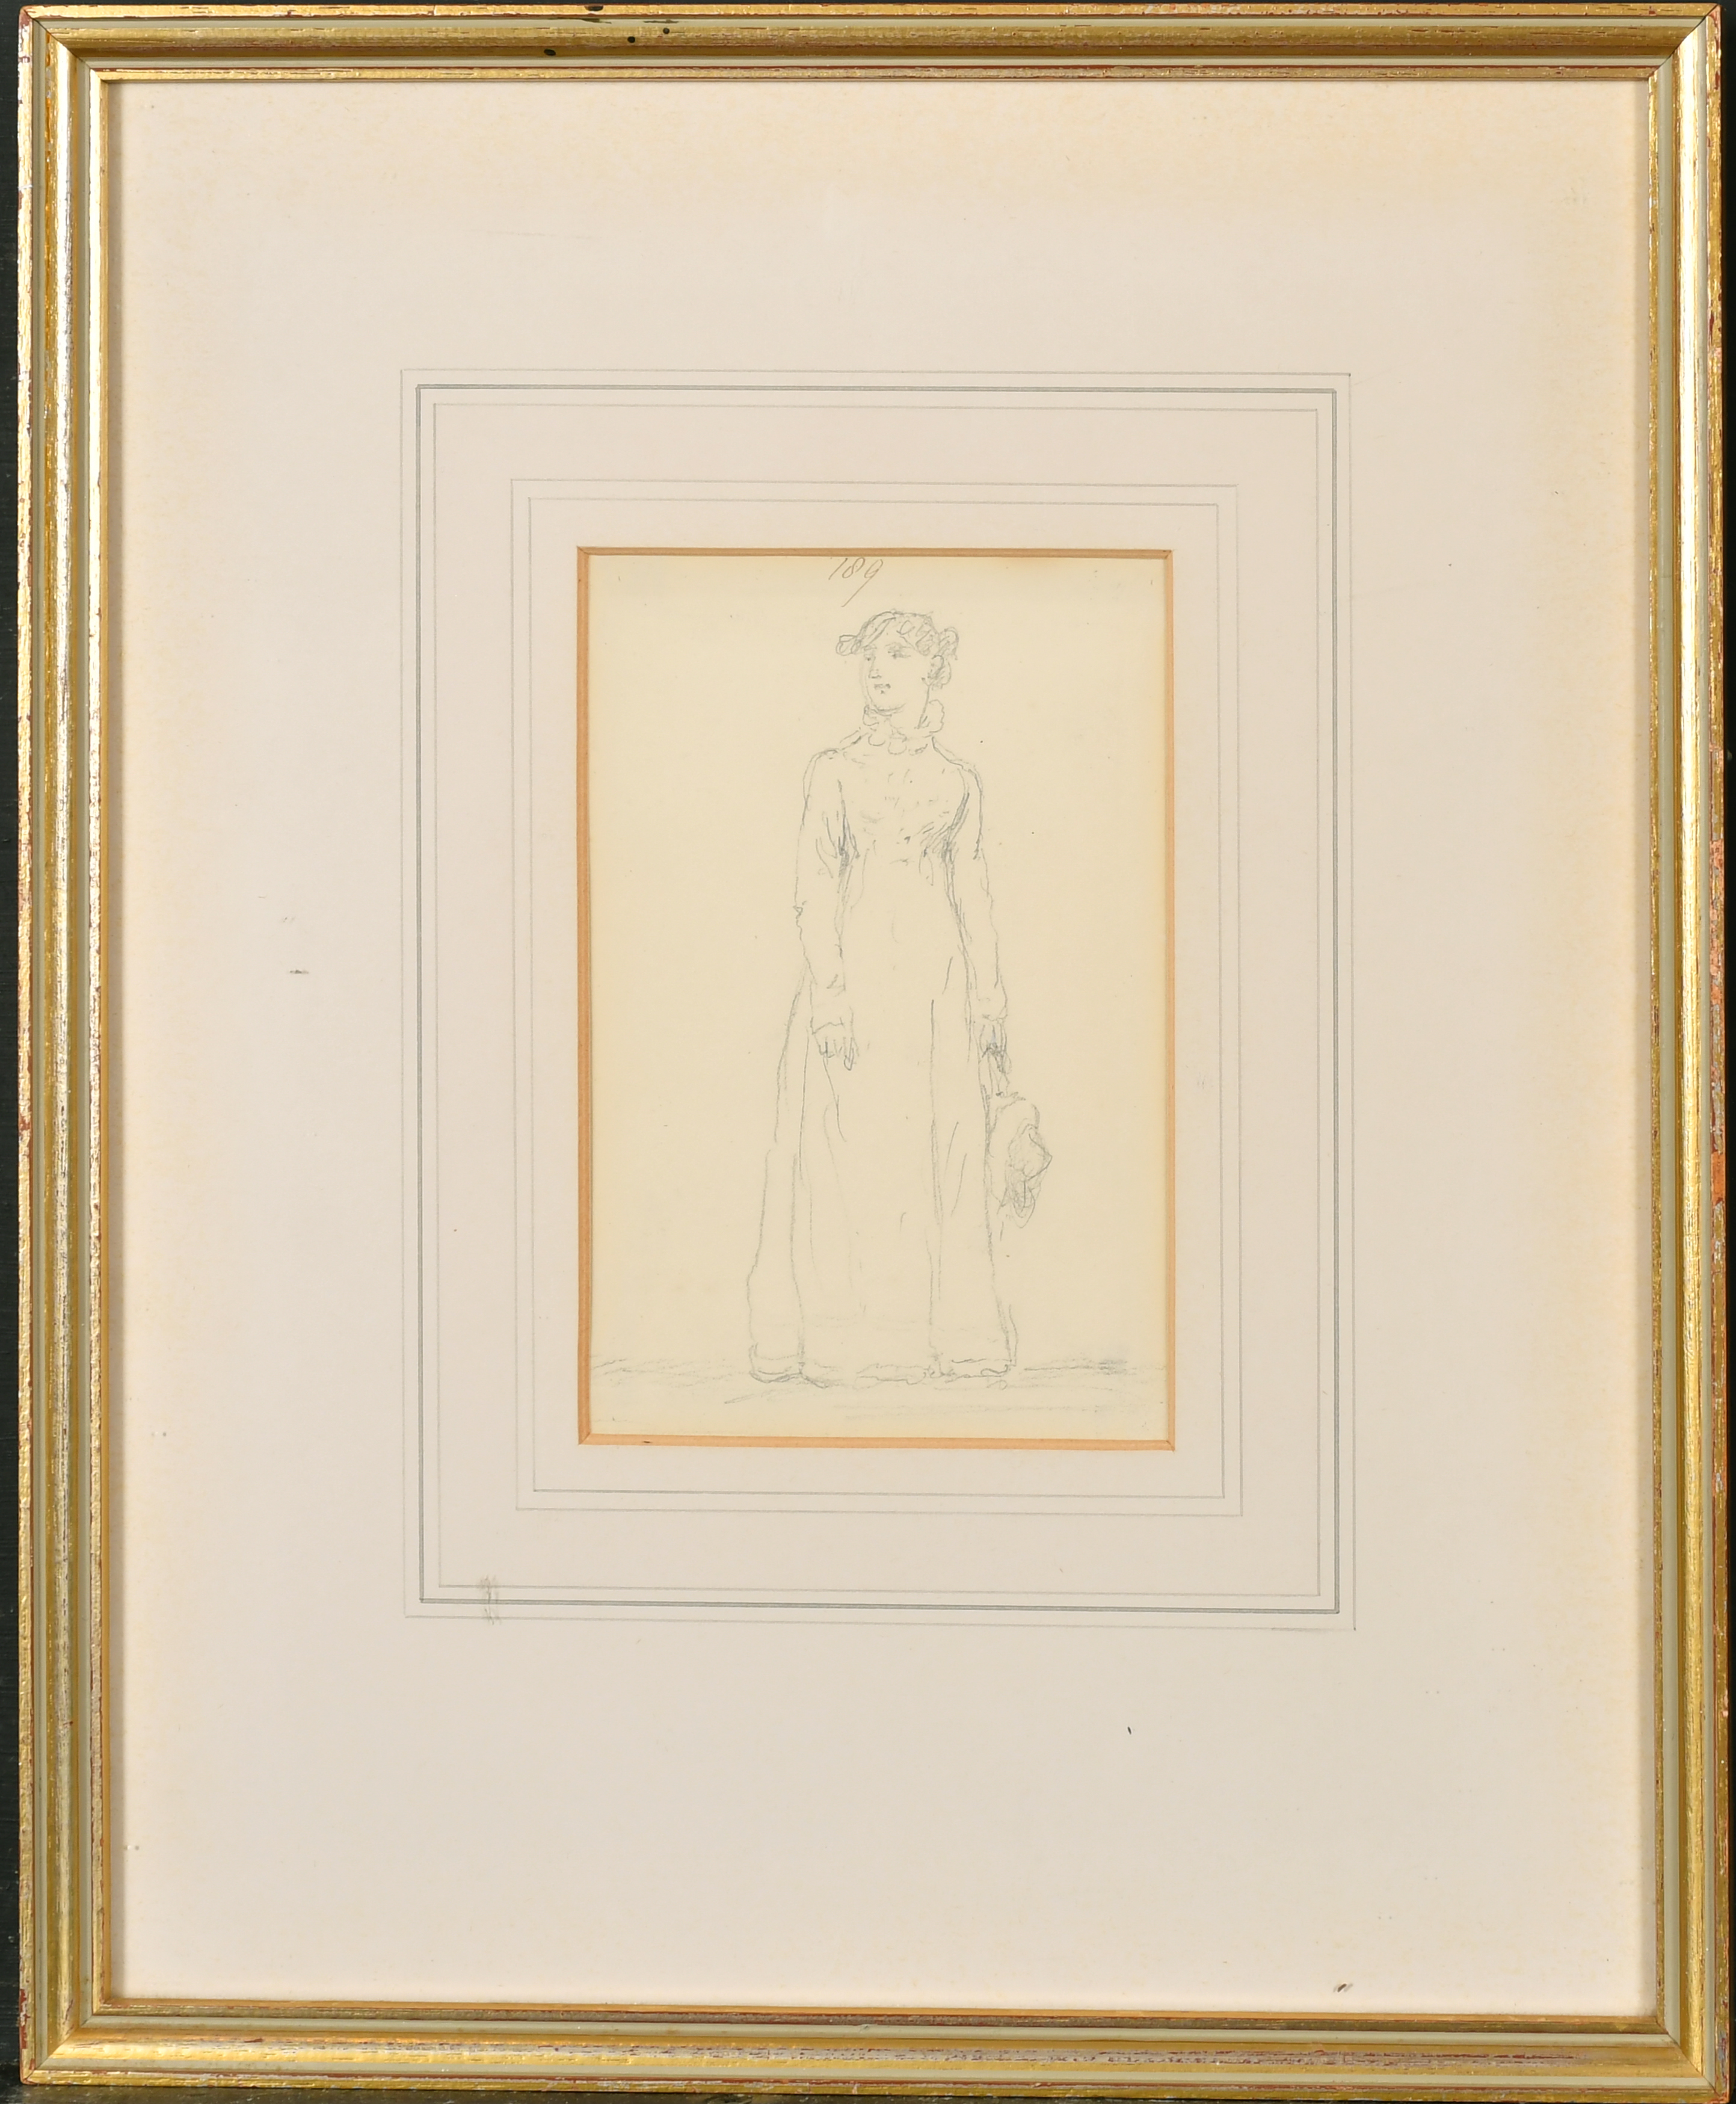 John Nixon (1750-1818) British. A Full Length Portrait of a Lady, Pencil, Numbered 189, 6.5" x 4.25" - Image 4 of 7